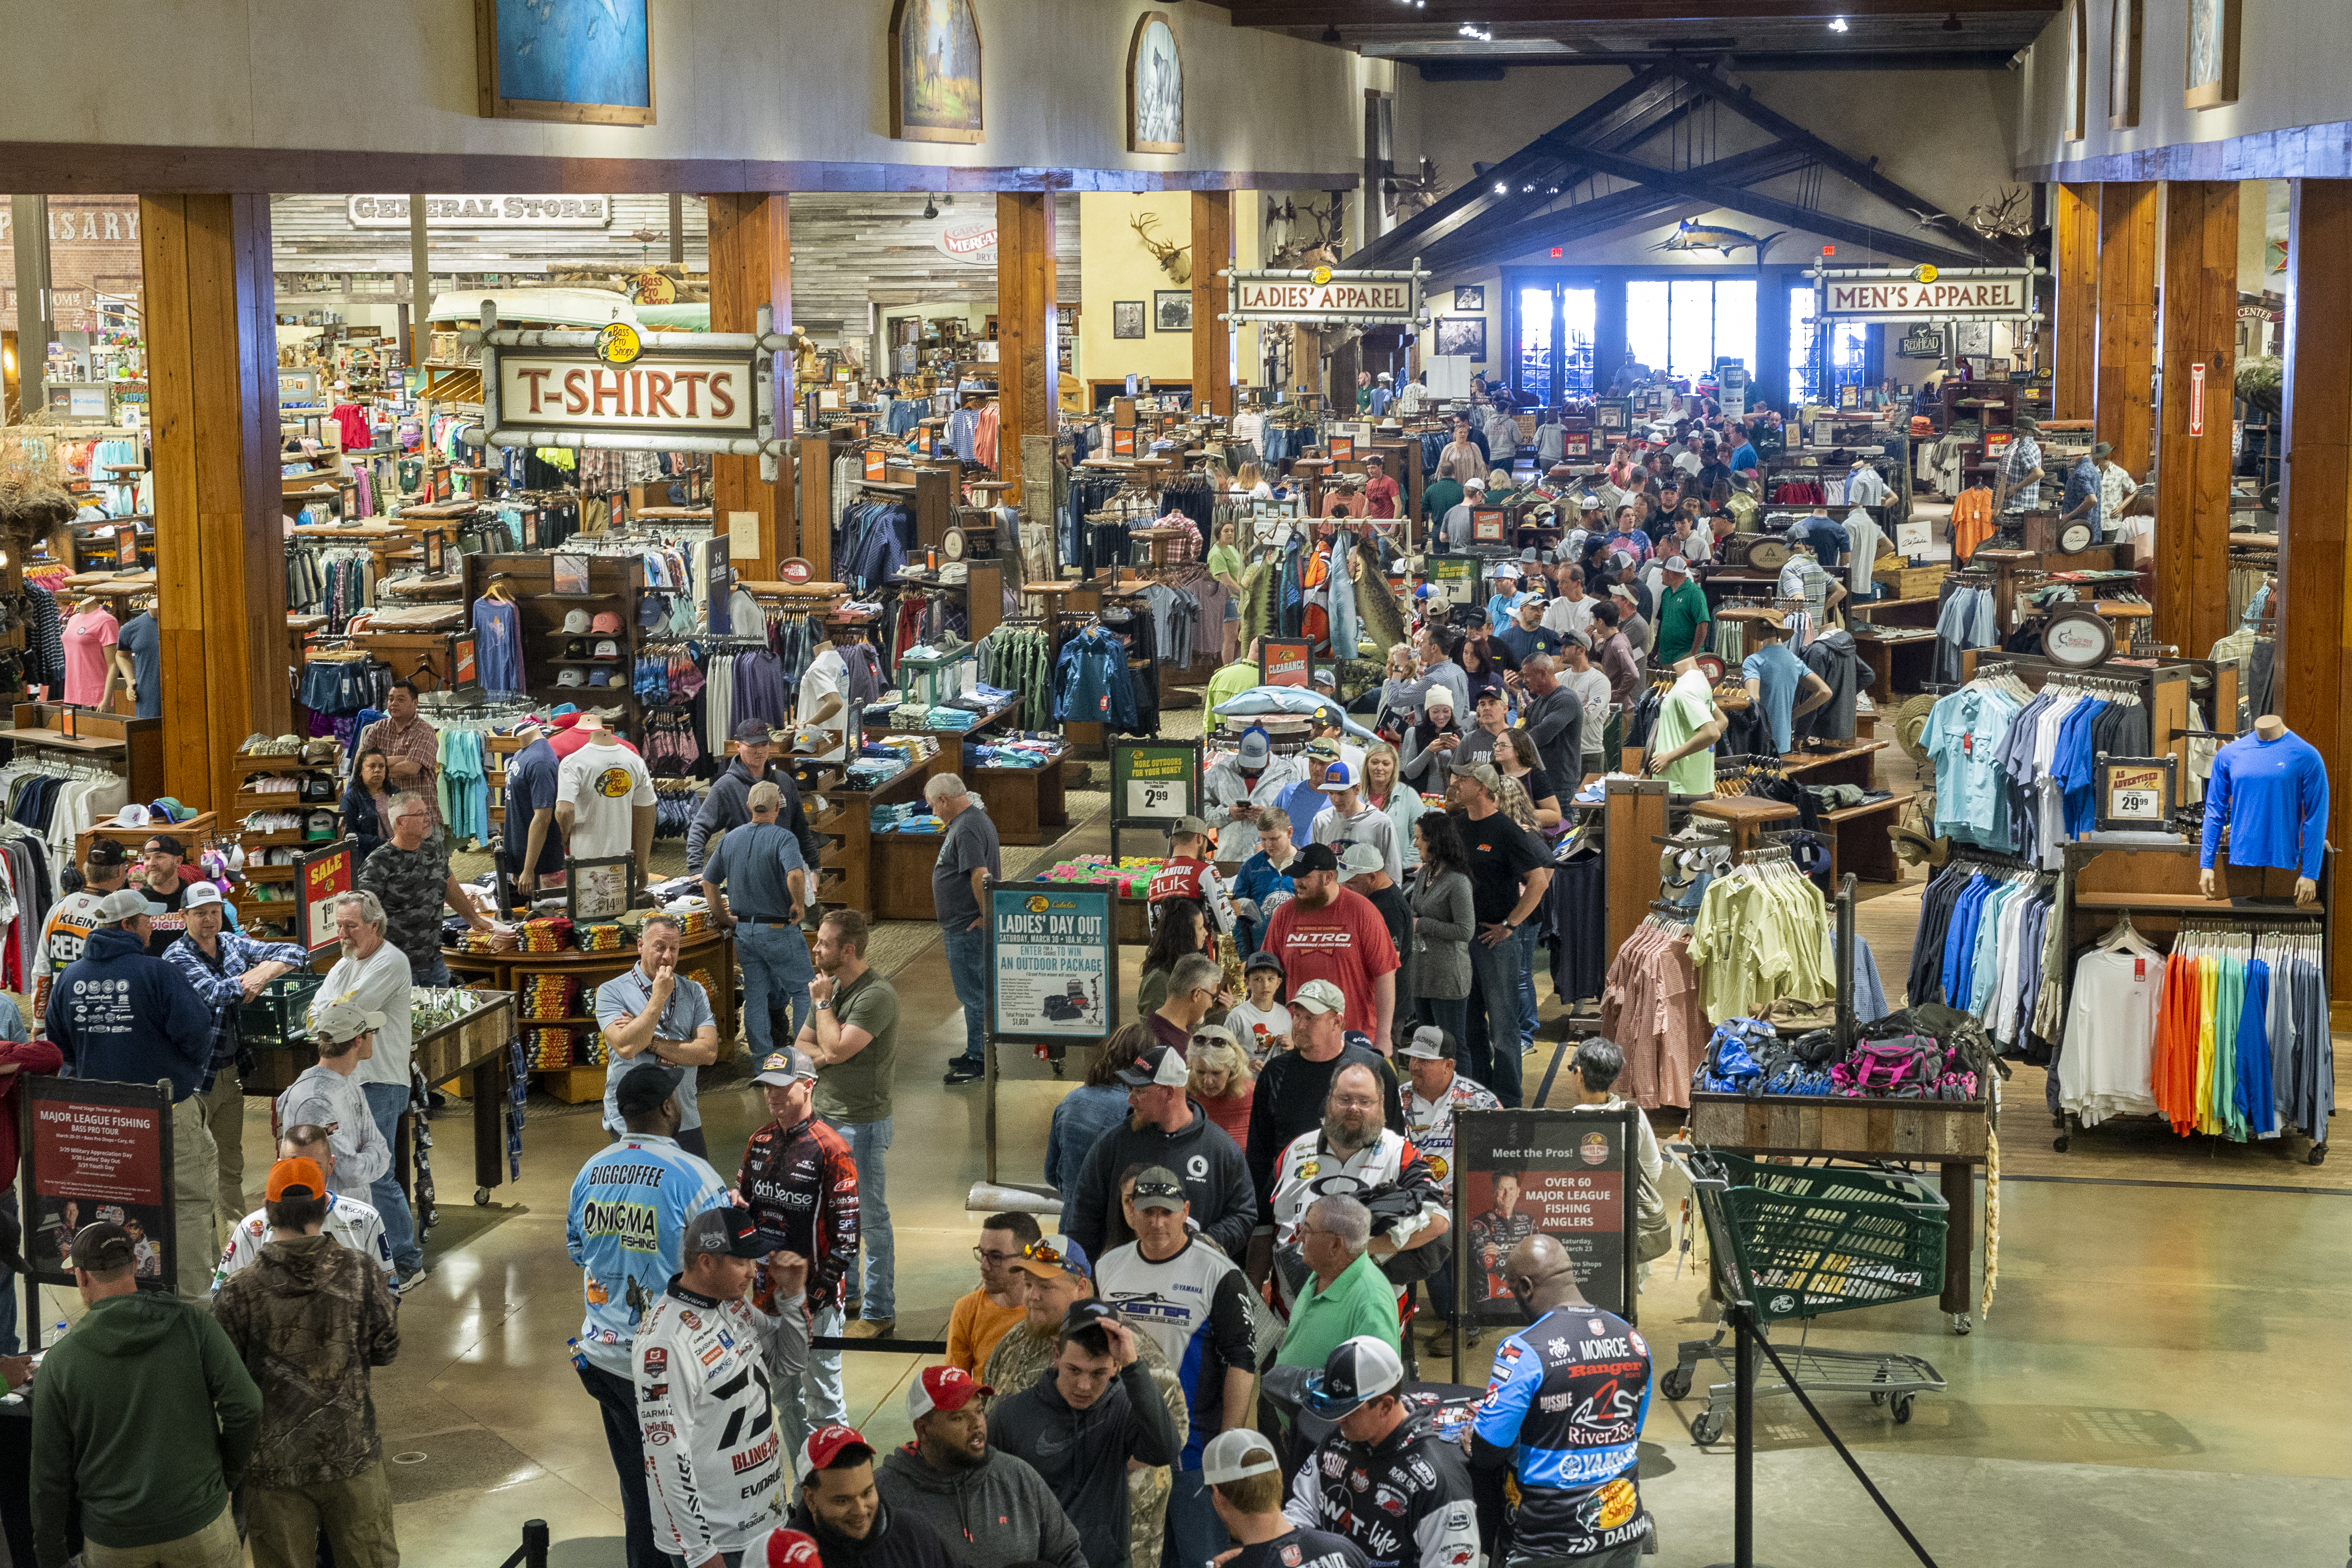 Crowds pour in as Bass Pro Shops opens in A.C.